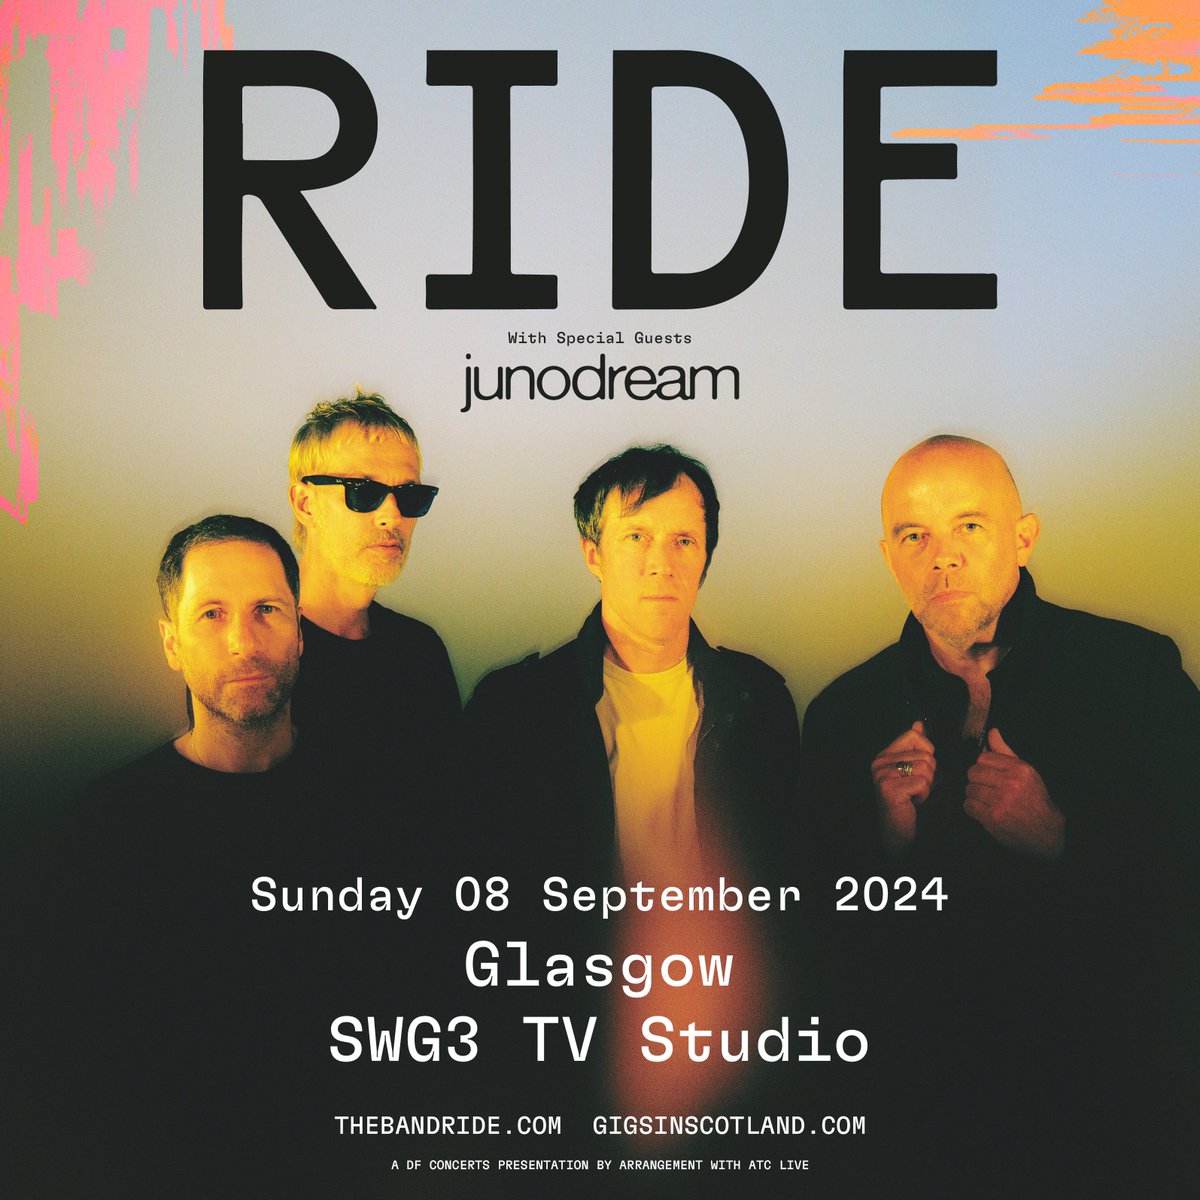 SUPPORT ADDED » @junodreamband will now be supporting @rideox4 at the @SWG3glasgow TV Studio show on 8th September⚡️ MORE INFO ⇾ gigss.co/ride